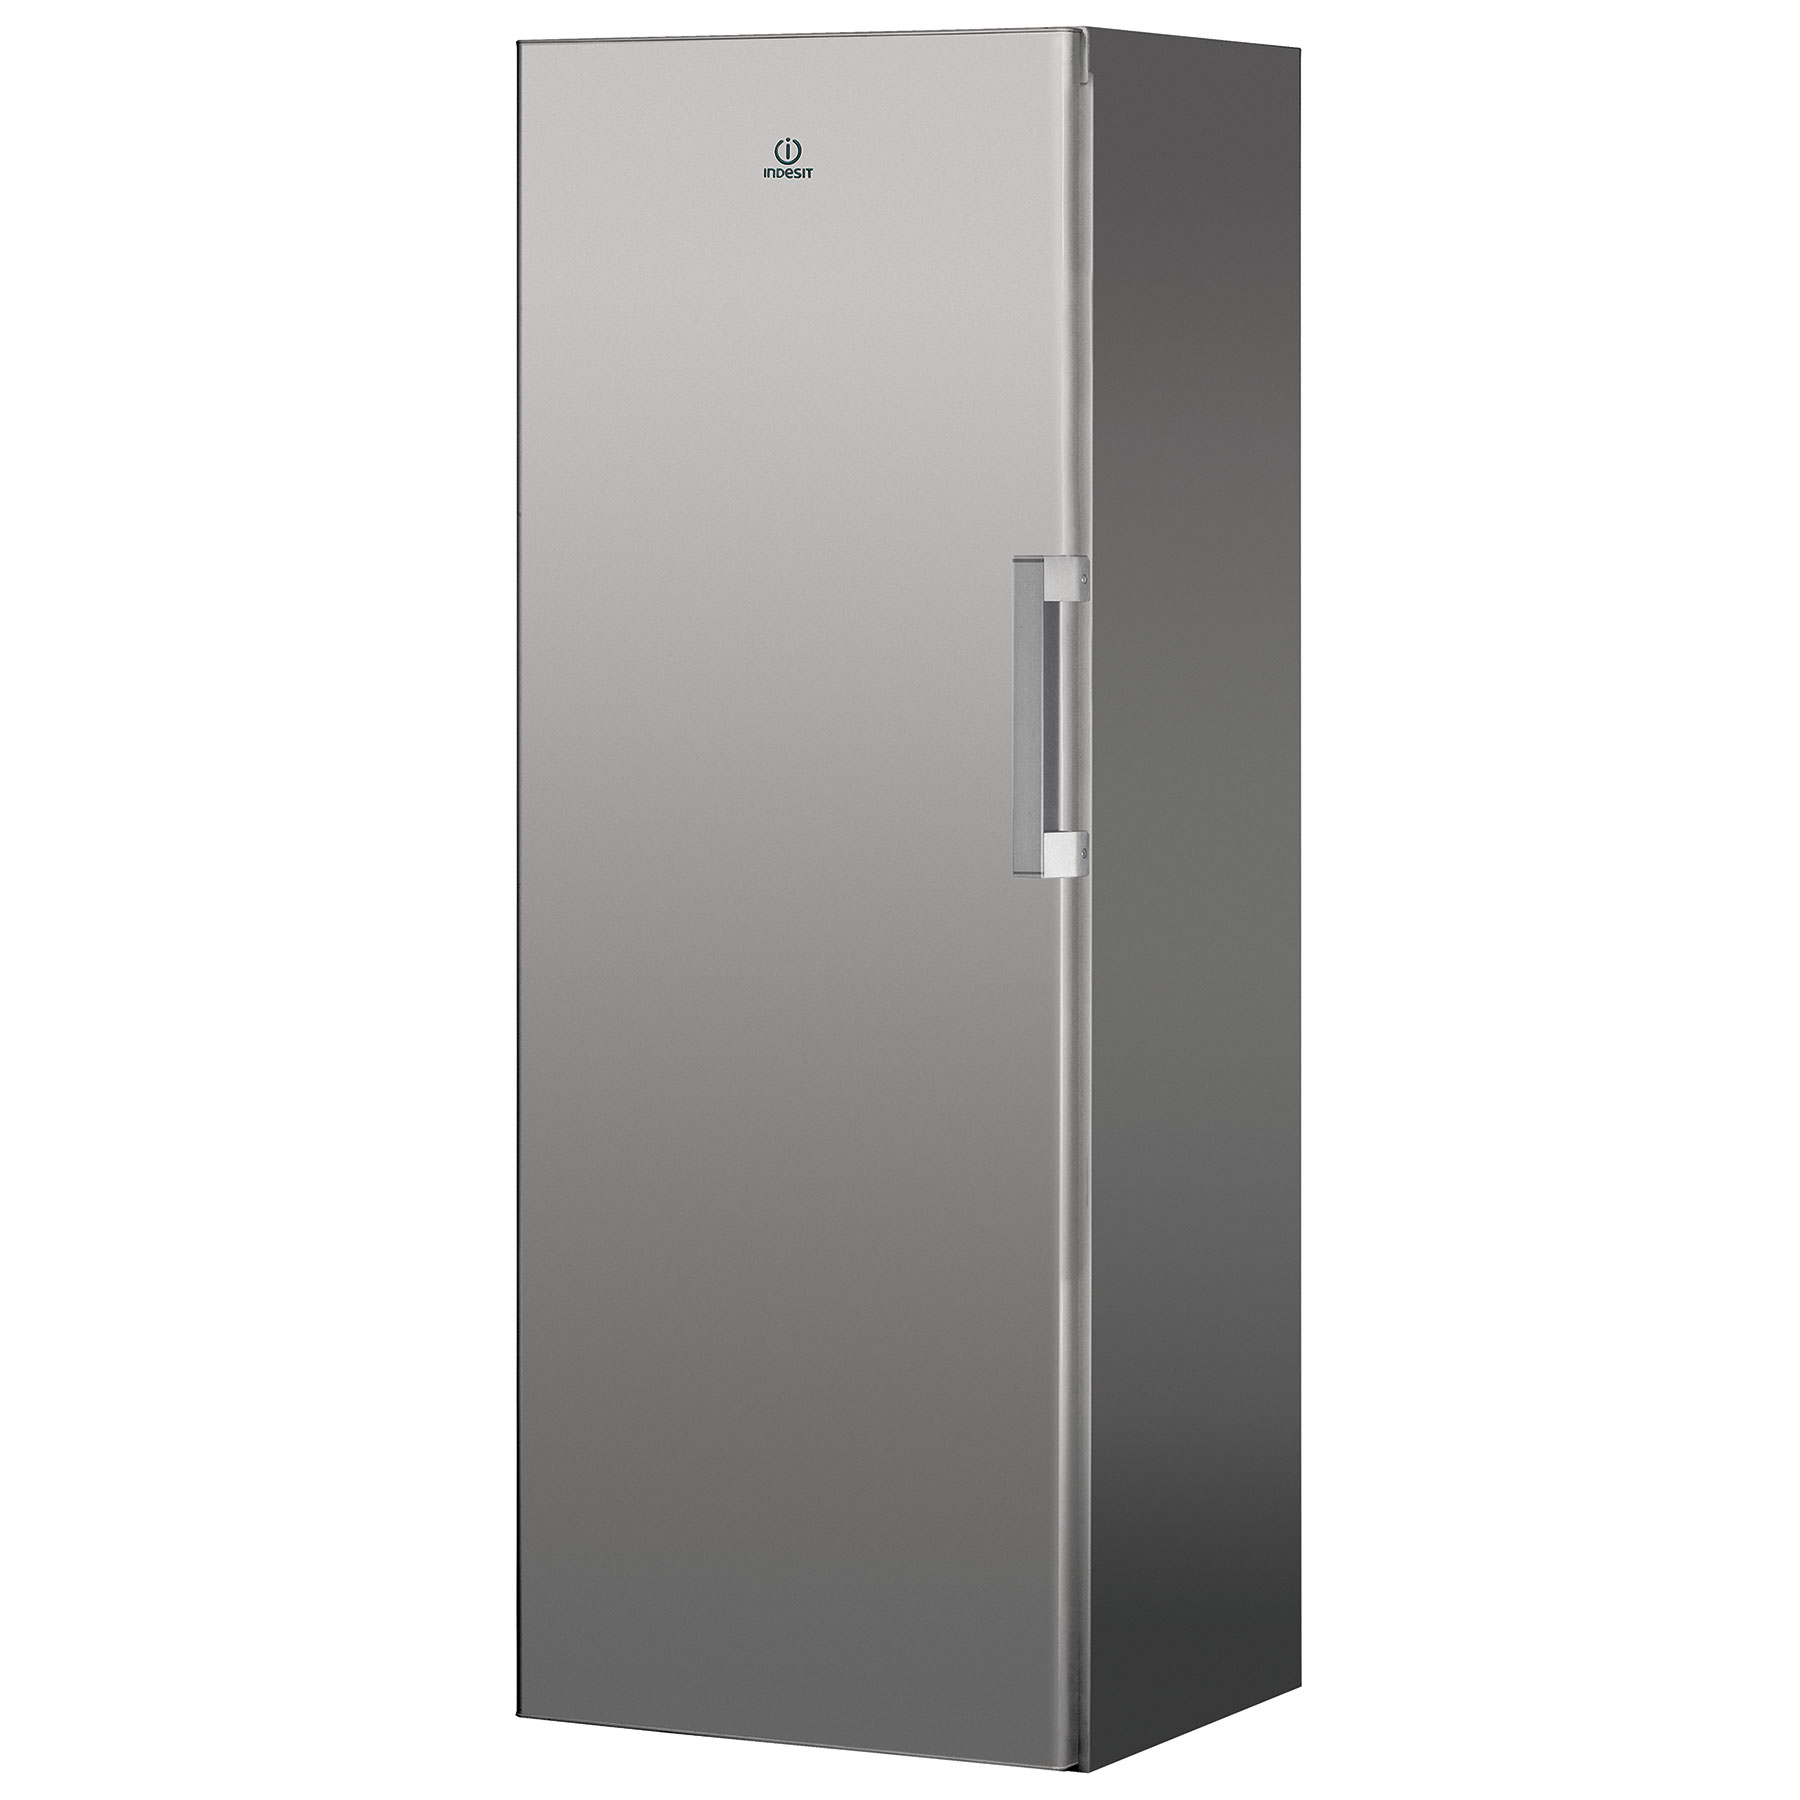 Image of Indesit UI6F2TS 60cm Tall Frost Free Freezer Silver 1 67m E Rated 228L